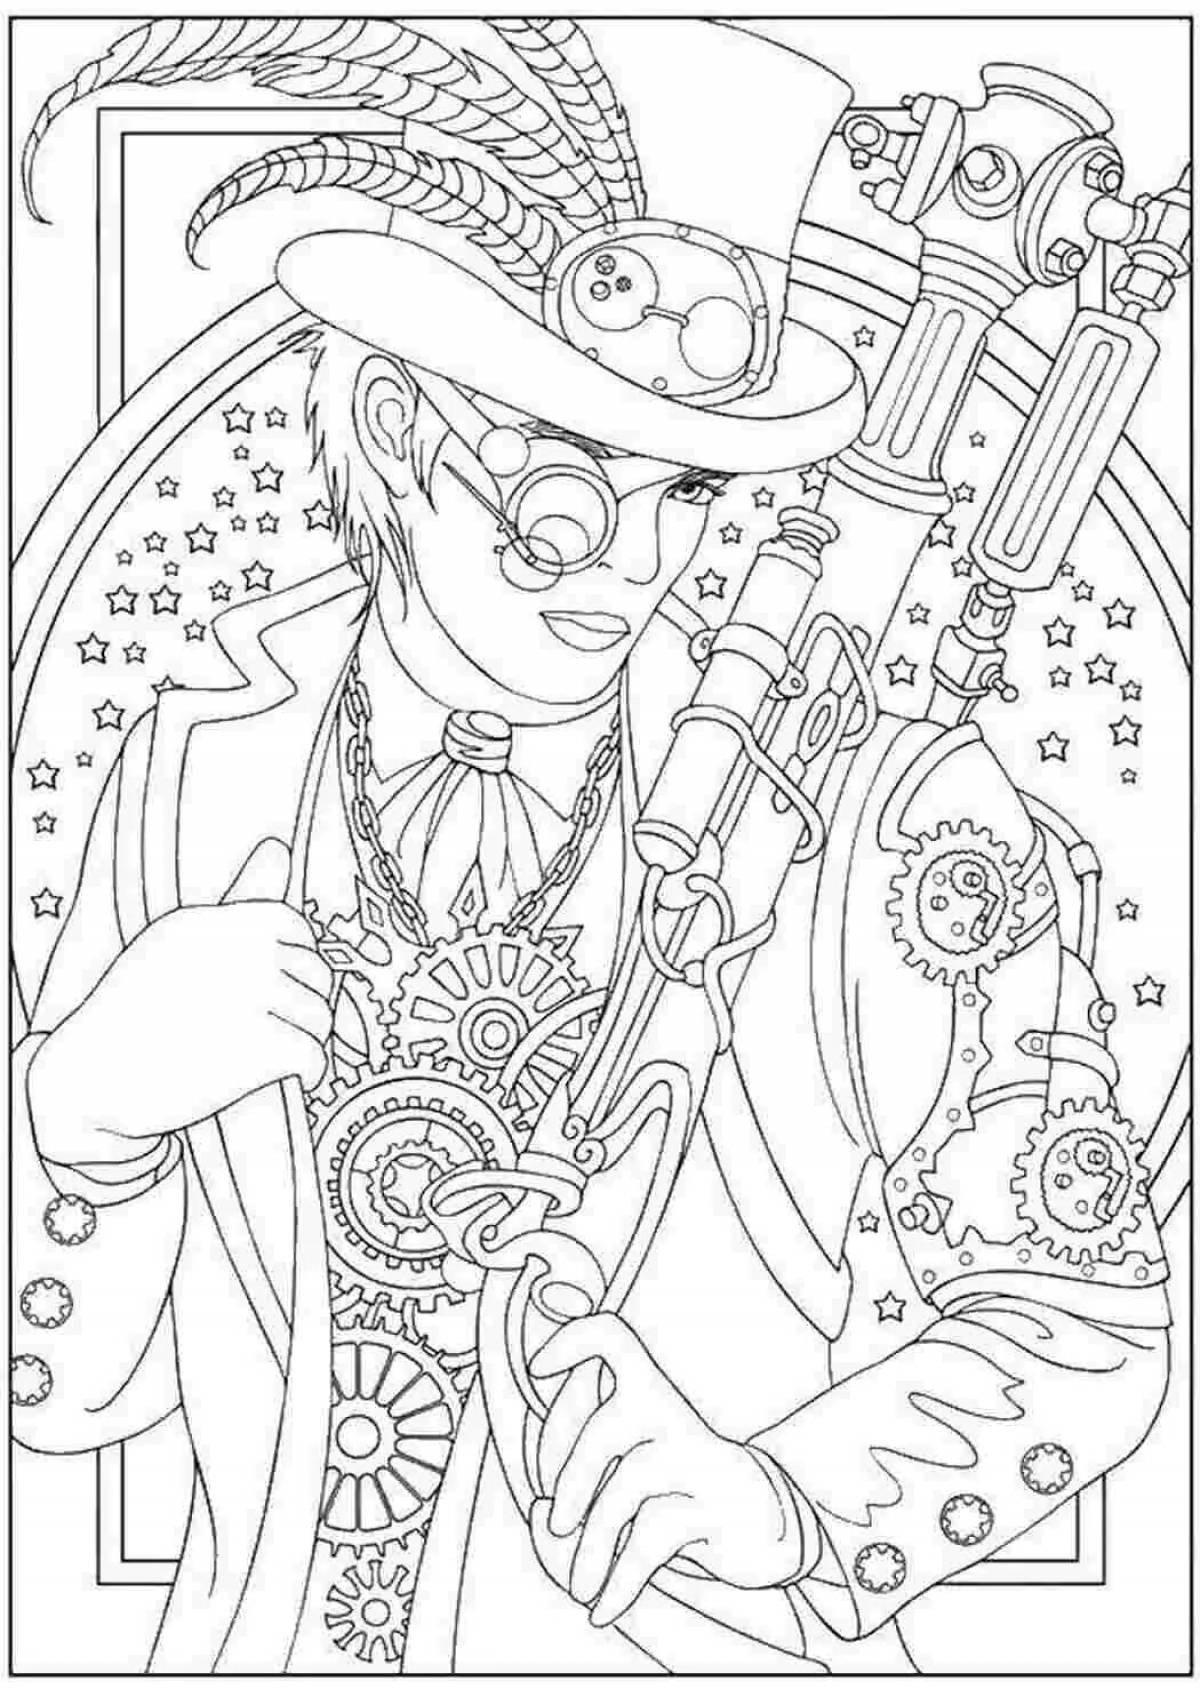 Inviting steampunk coloring book